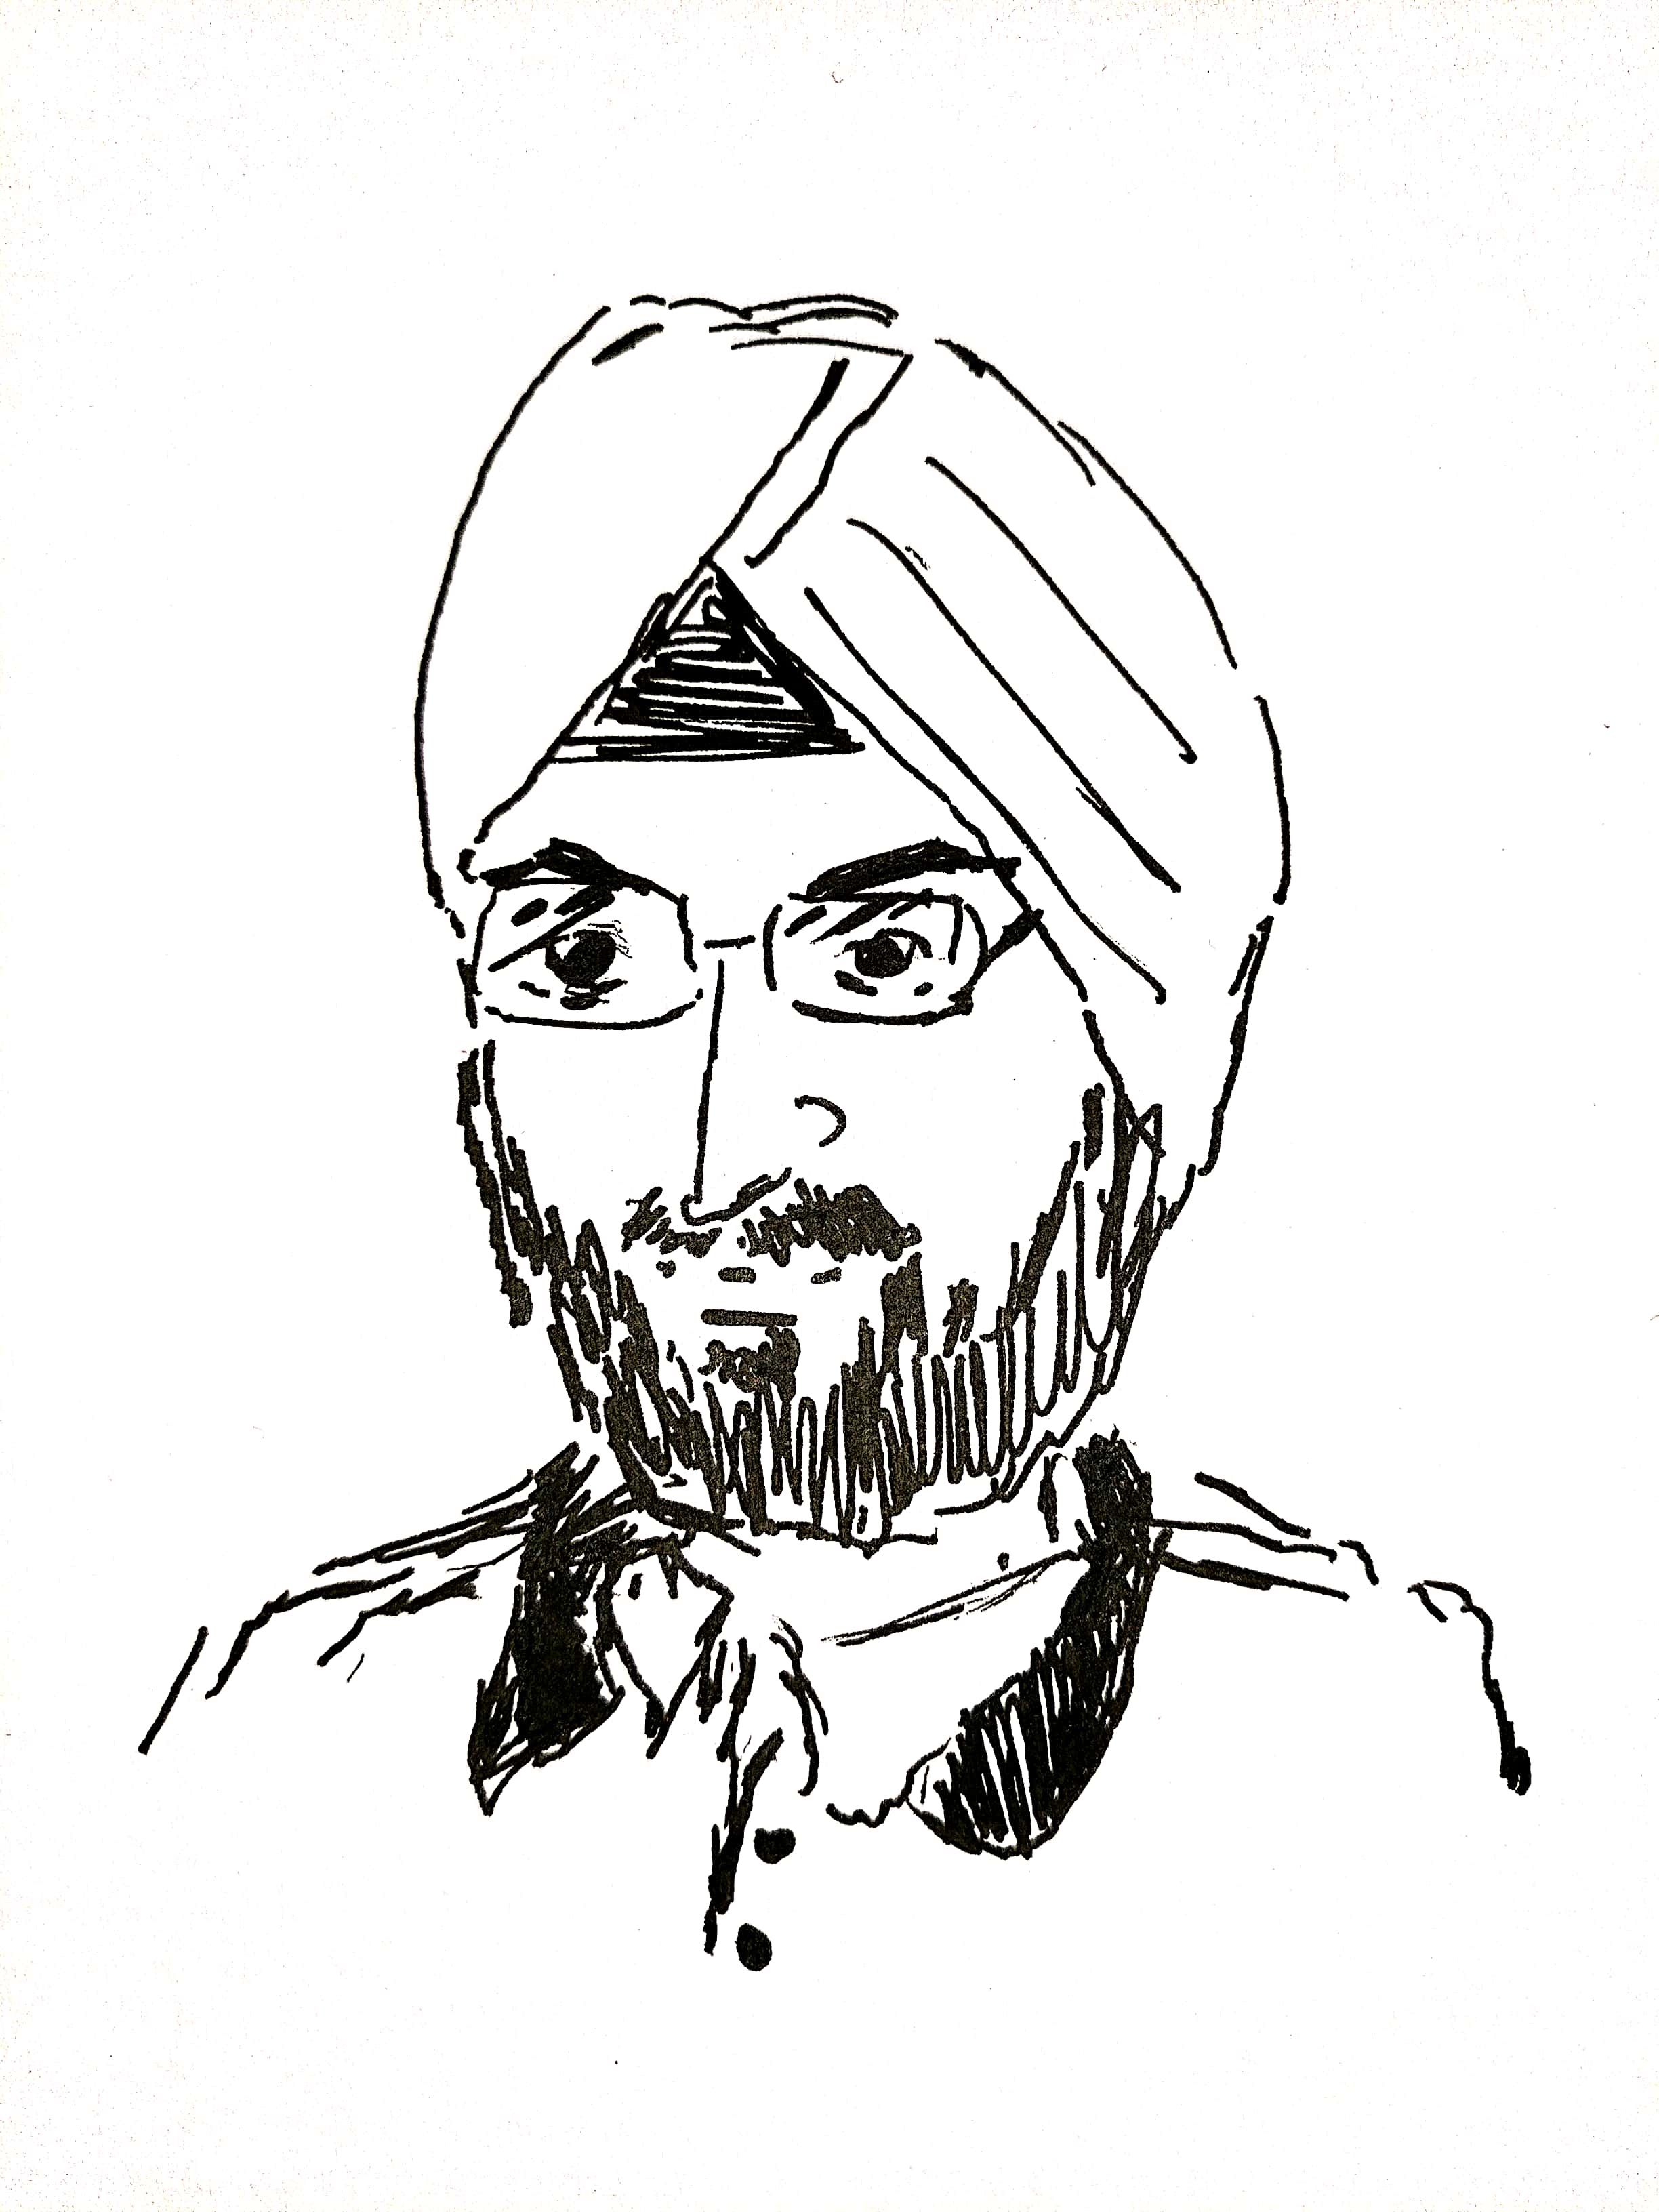 Harpreet Singh Gauri, Product Experience at Zebpay and a fan of the Lightning Network